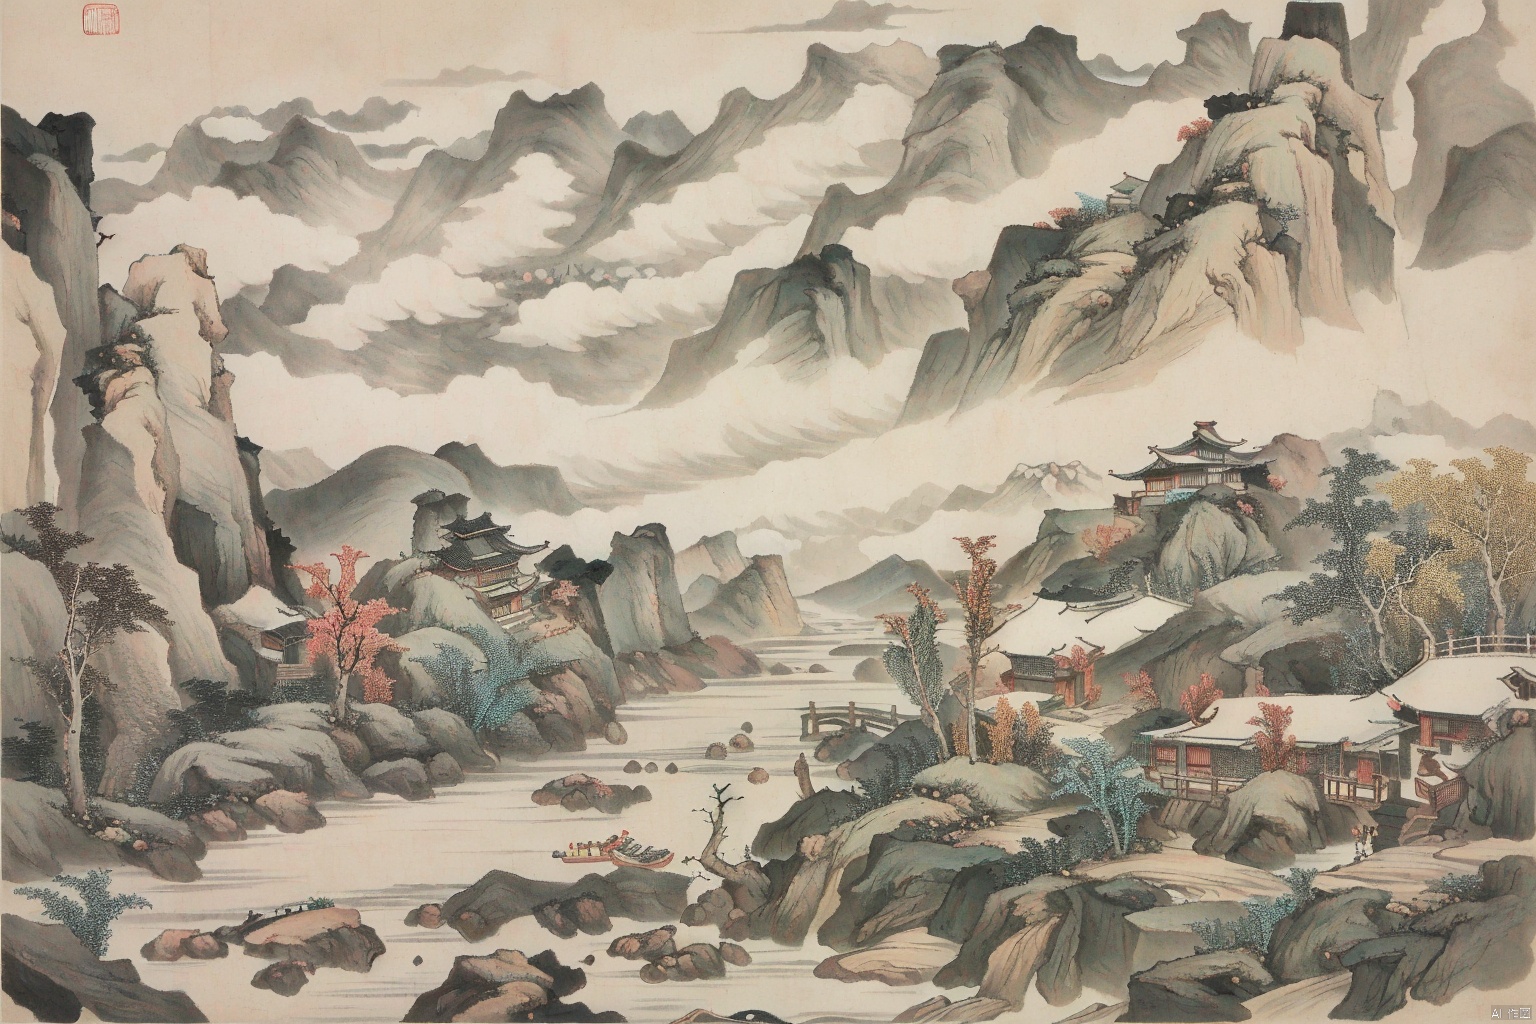  Chinese style ink landscape painting, trees, mountains, rivers, huts, boats, gf, Ancient costume